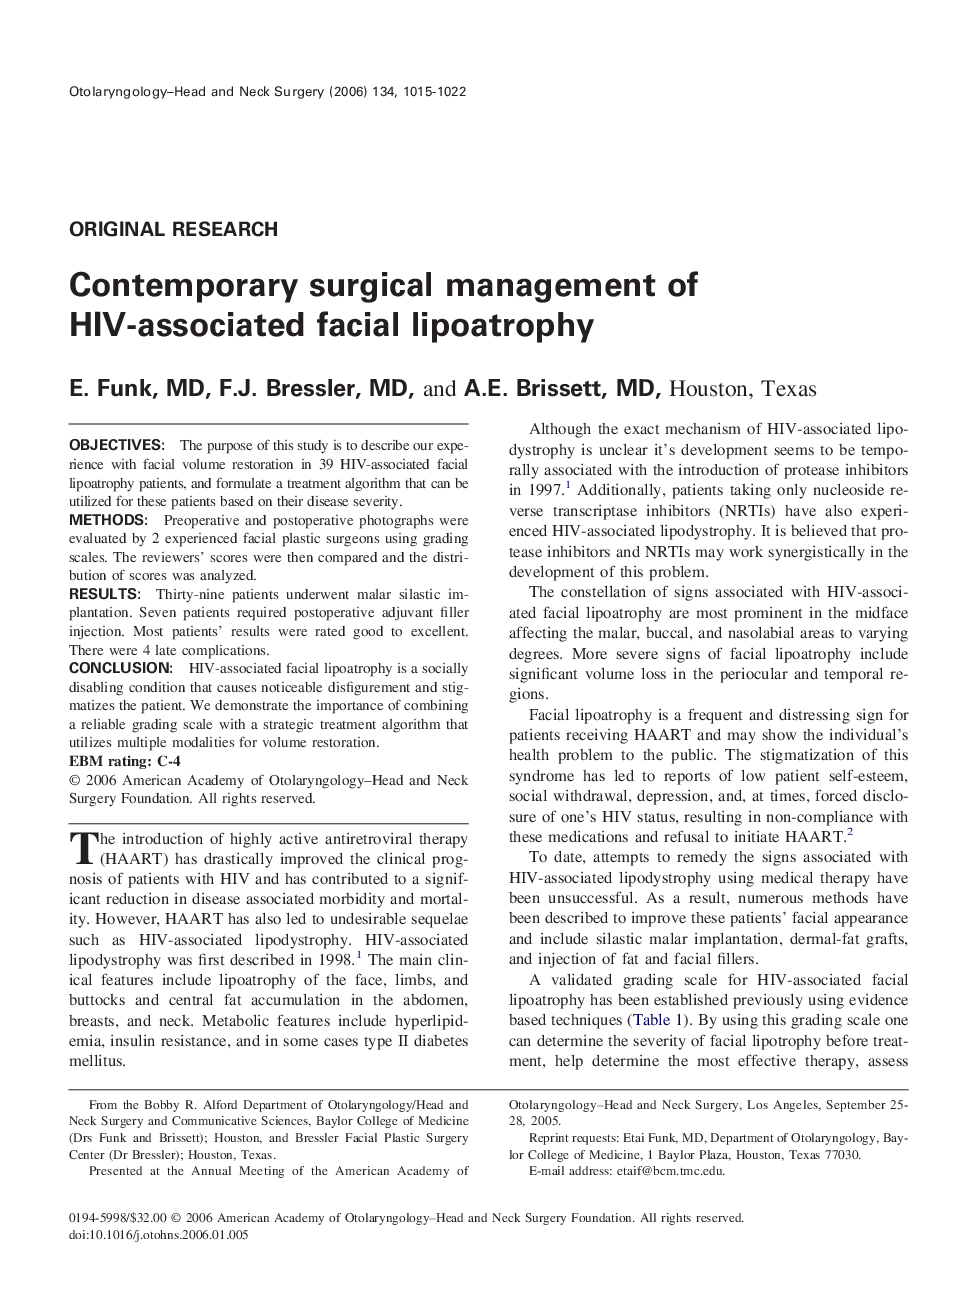 Contemporary surgical management of HIV-associated facial lipoatrophy